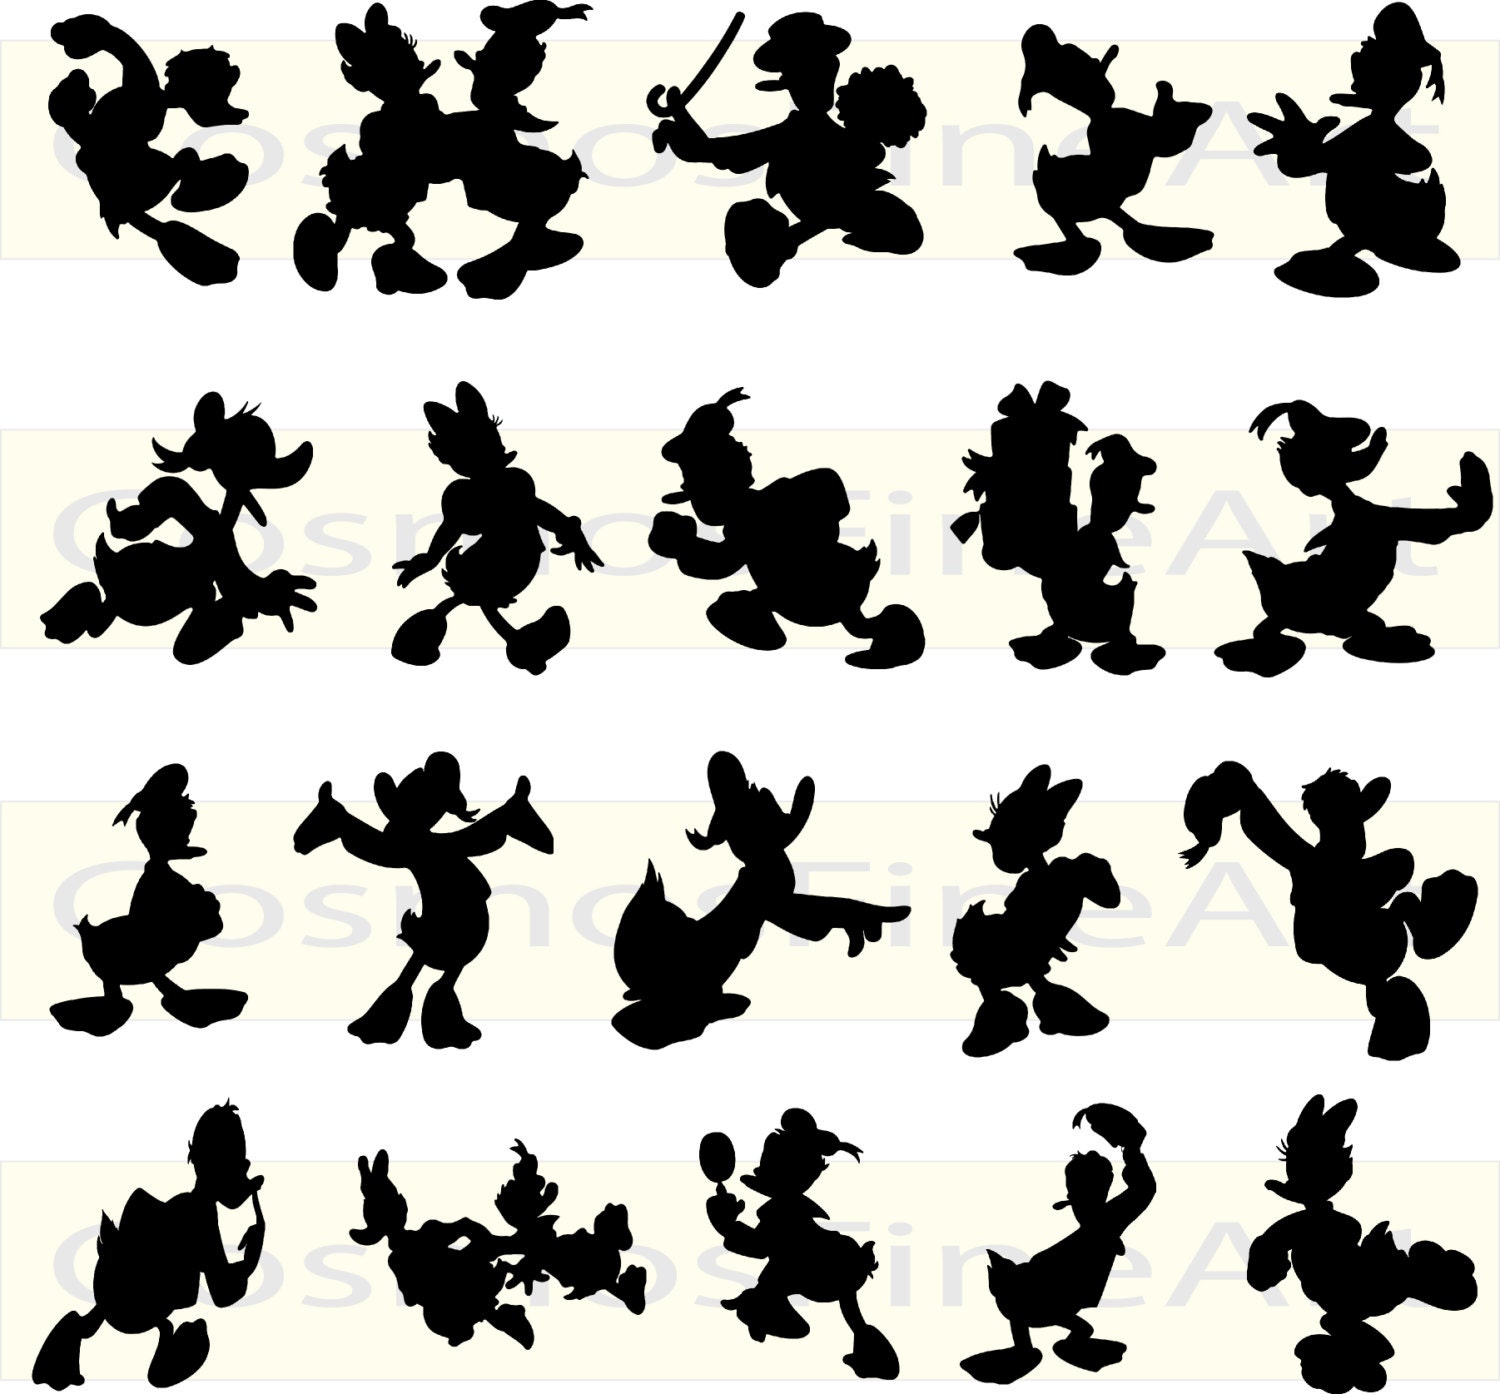 Donald and daisy duck silhouette digital clipart 20 PNG 20